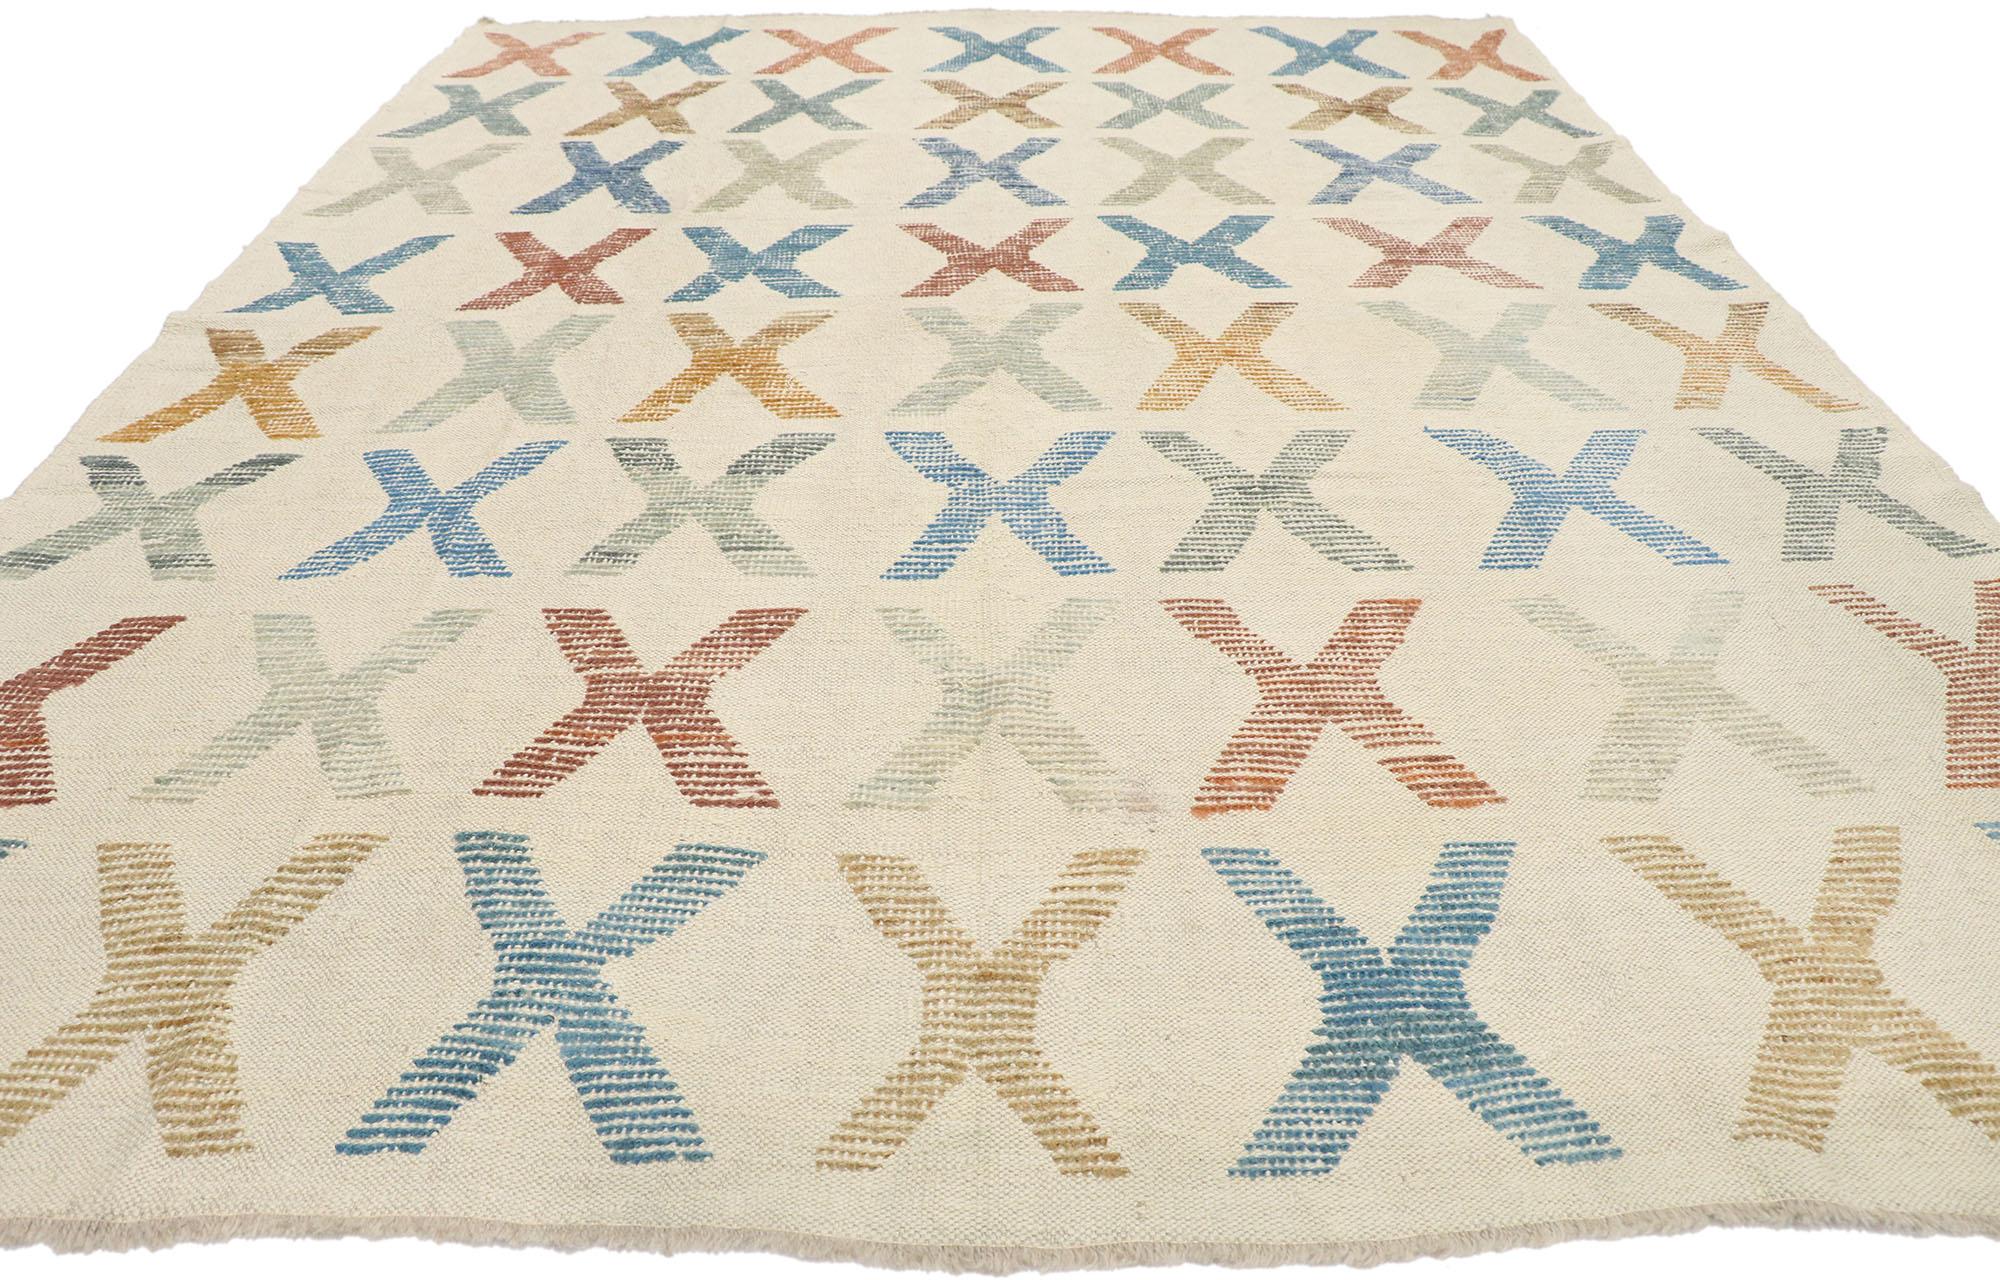 New Contemporary Turkish Kilim Area Rug with Tribal Boho Chic Style In New Condition For Sale In Dallas, TX